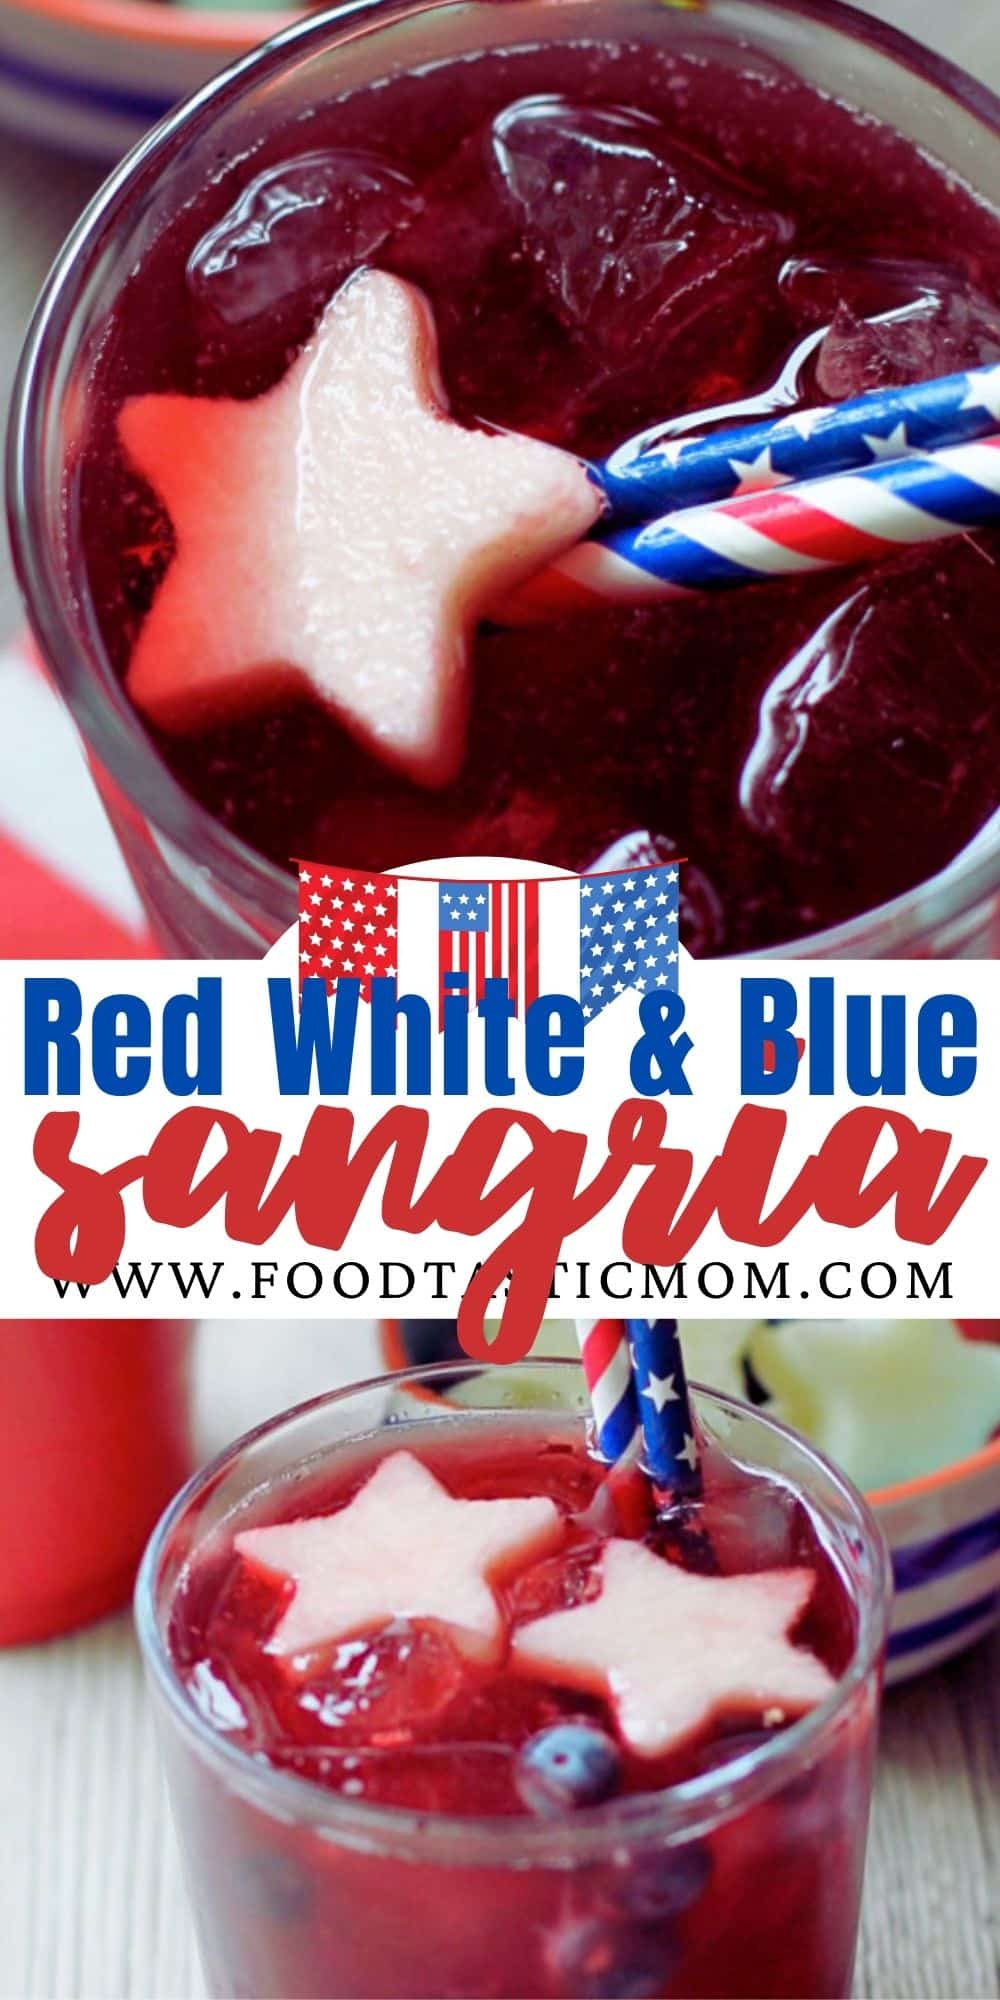 A delicious and celebratory sangria made with red wine and bourbon plus cherries, blueberries and jicama stars. via @foodtasticmom